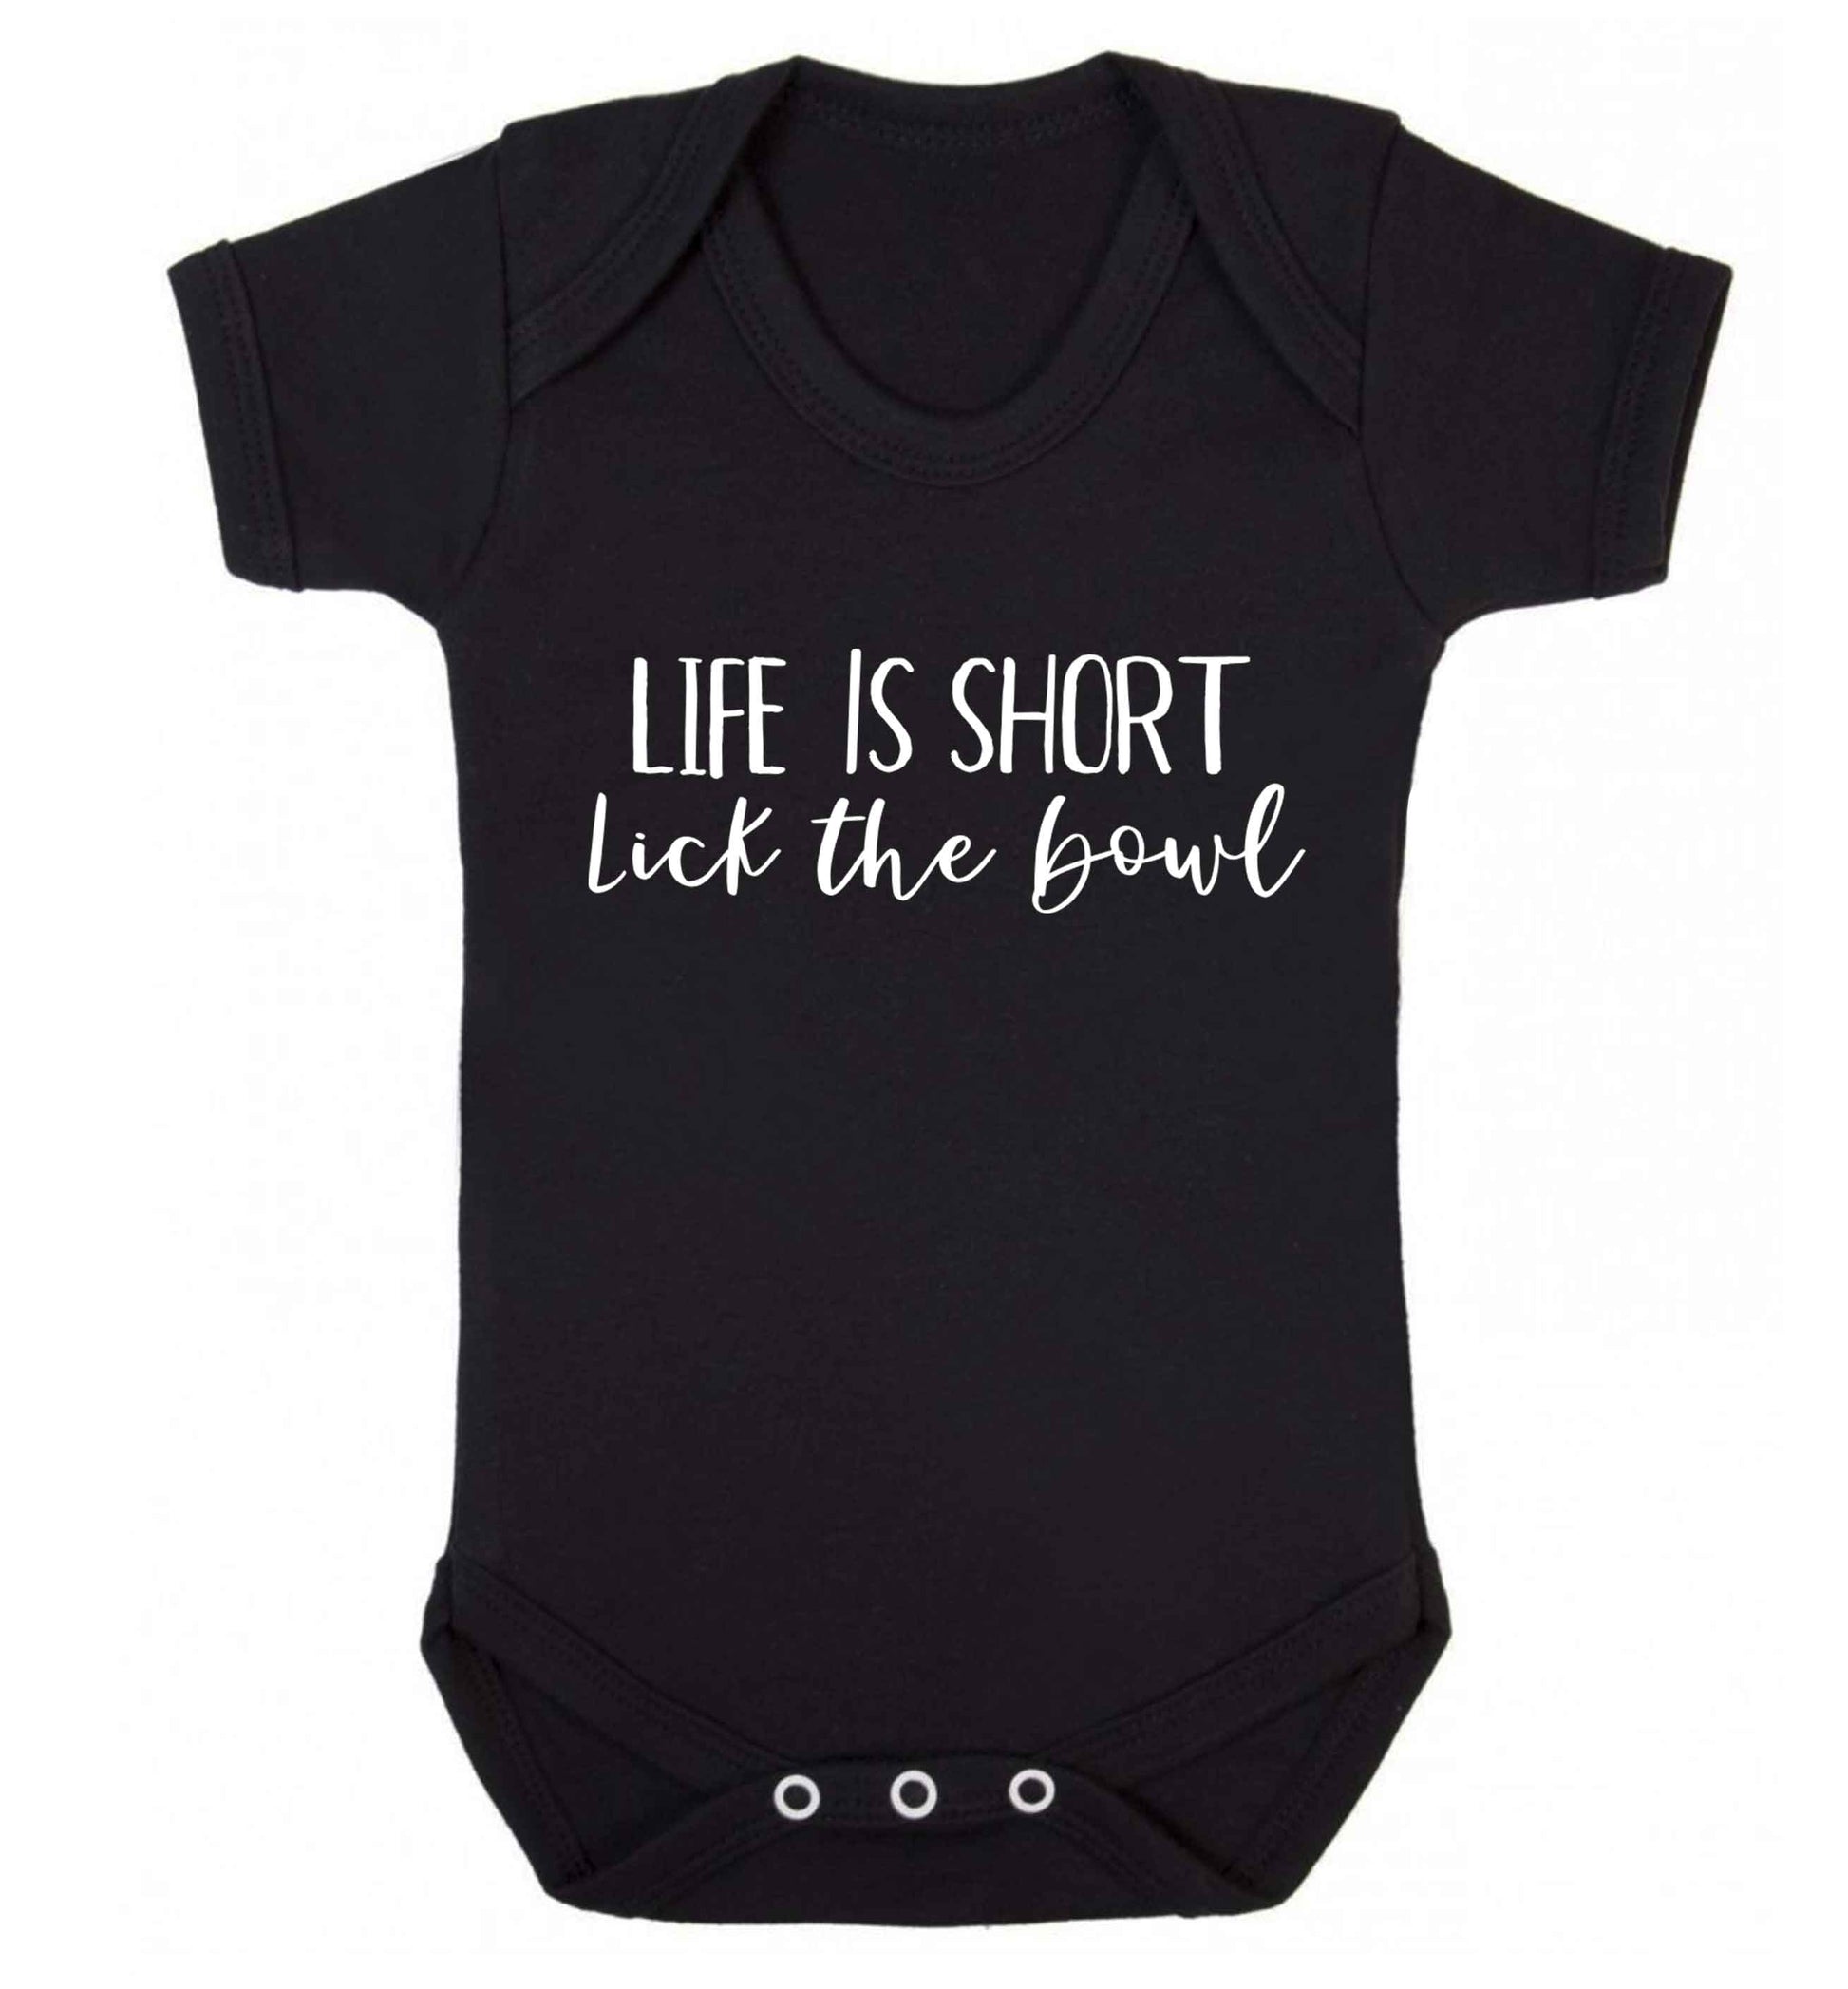 Life is short lick the bowl Baby Vest black 18-24 months